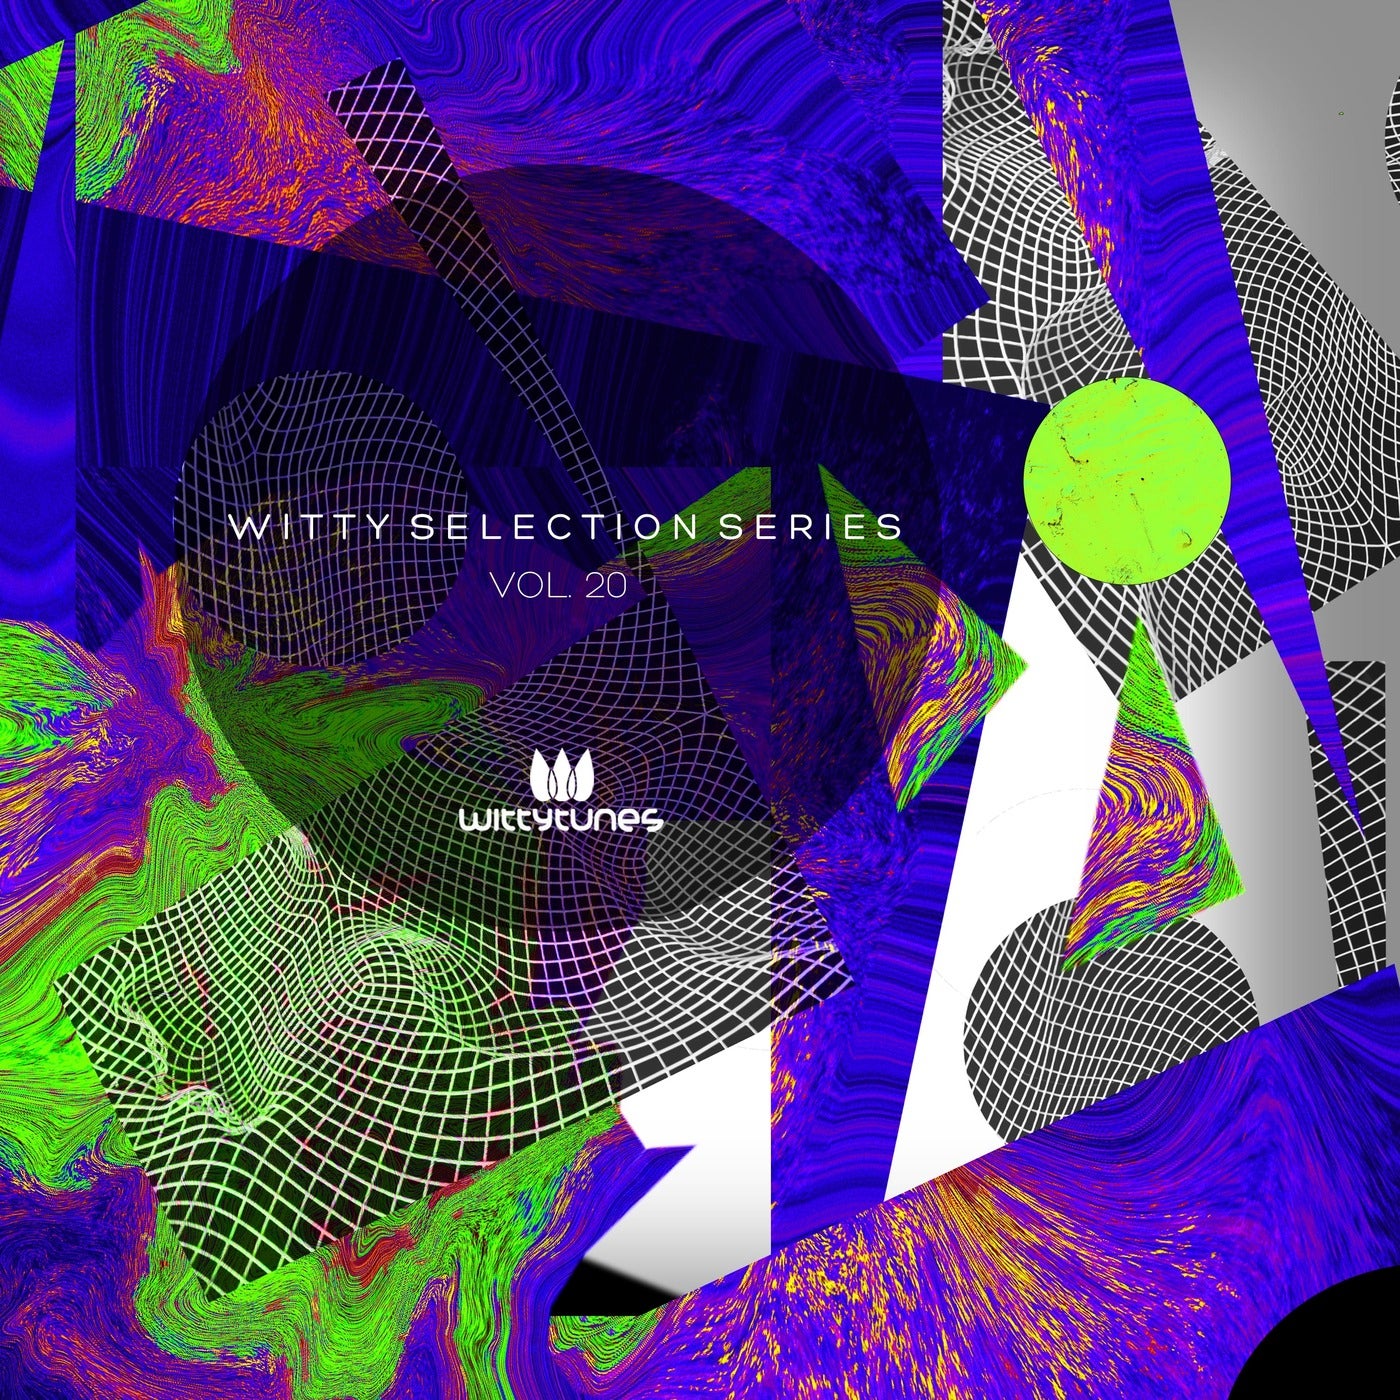 Witty Selection Series Vol. 20